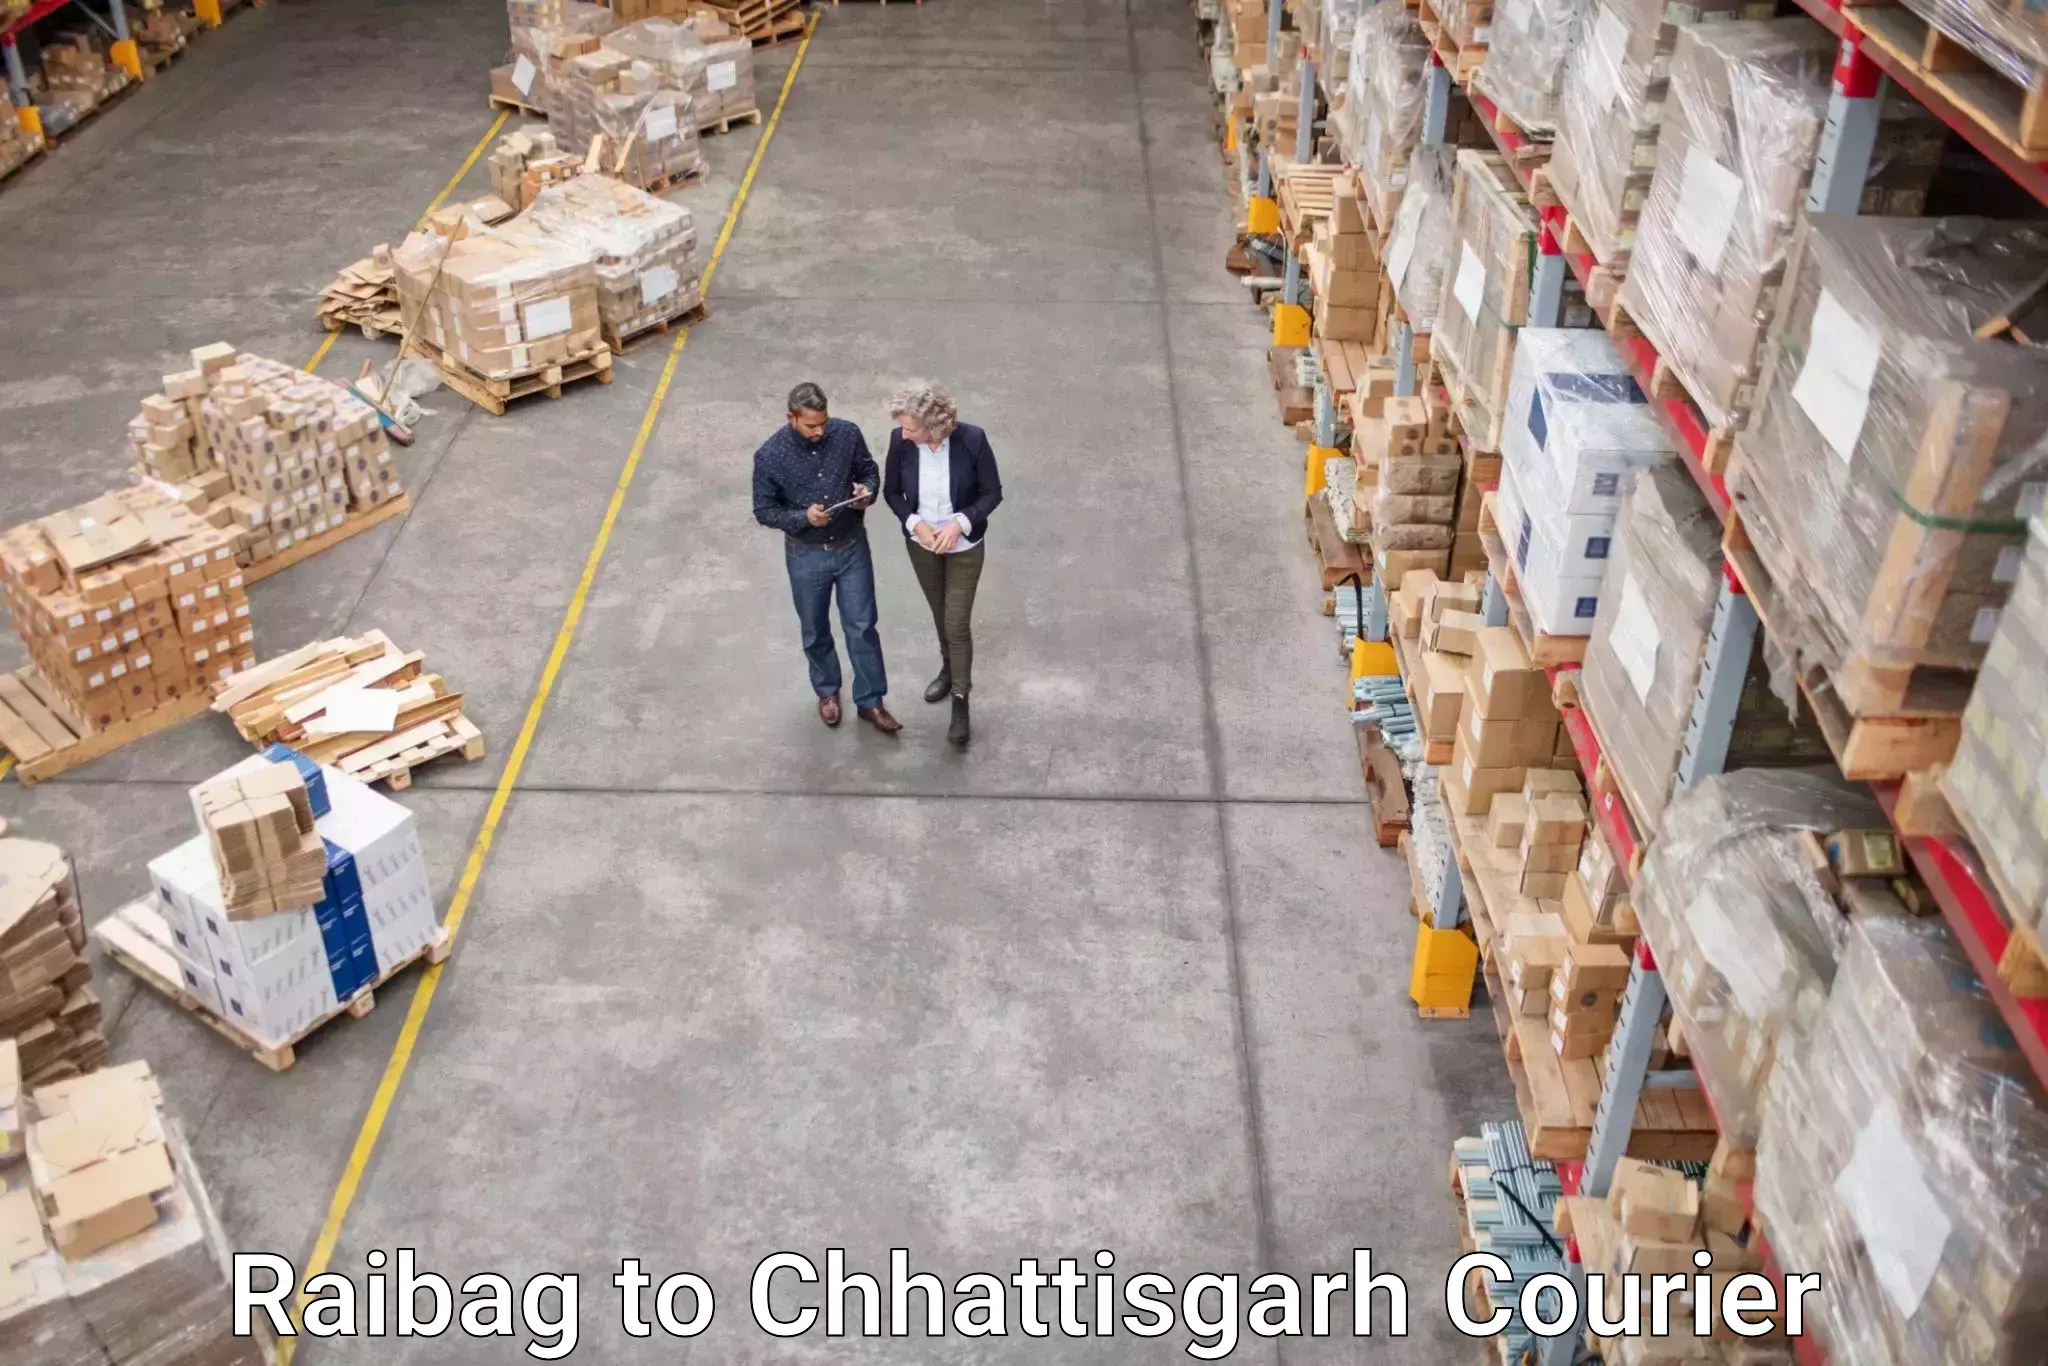 State-of-the-art courier technology Raibag to Chhattisgarh